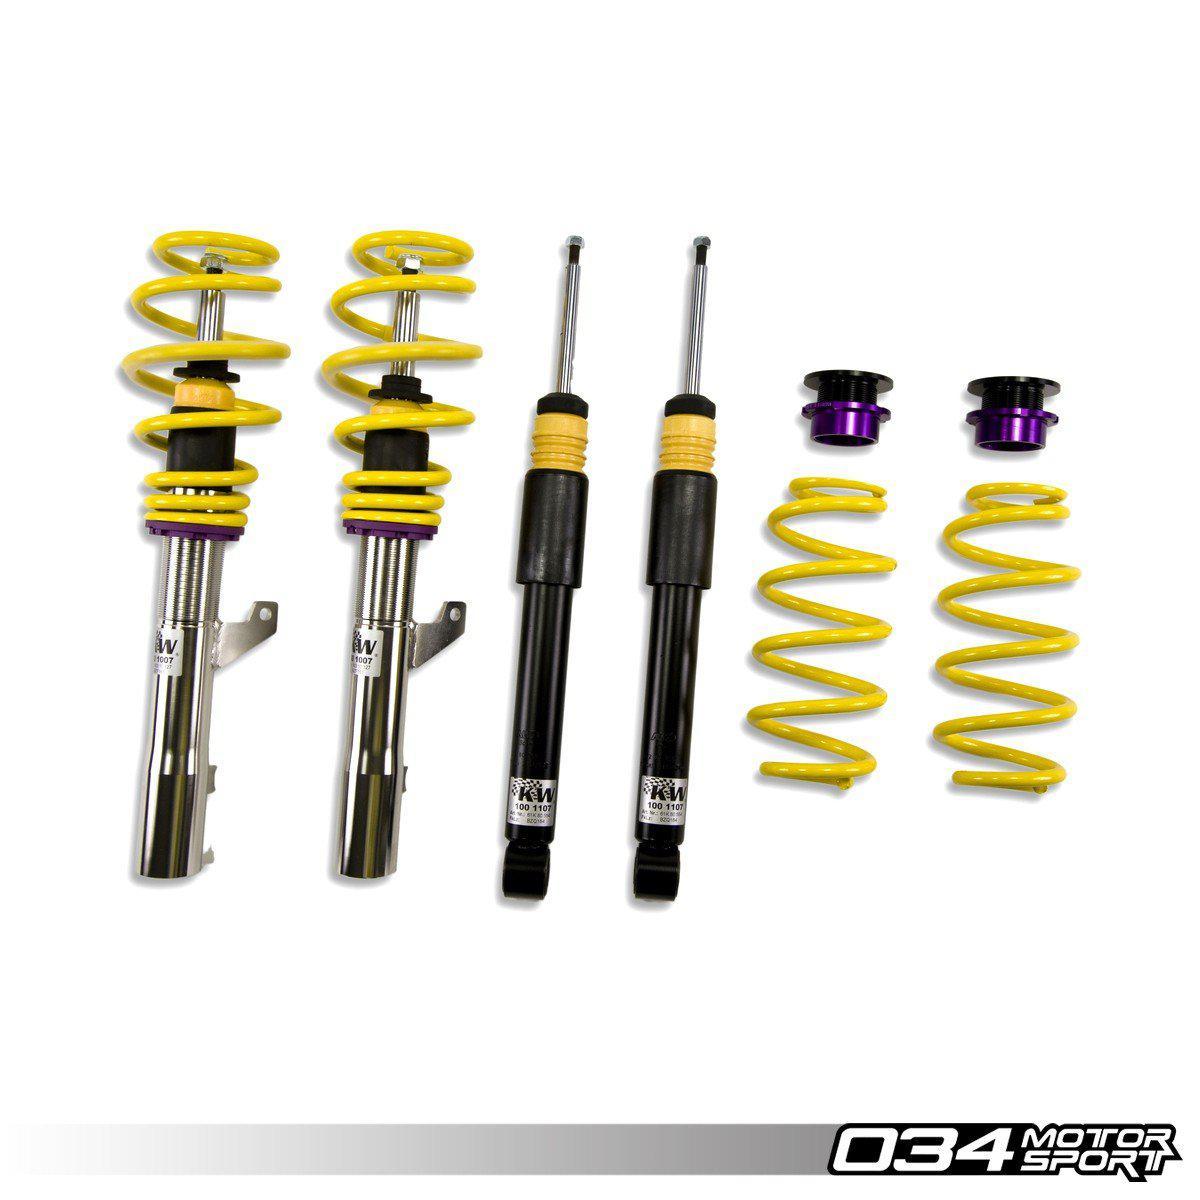 KW Variant 1 Coilover Suspension, MKVII Volkswagen GTI/Golf R Without Dcc-A Little Tuning Co